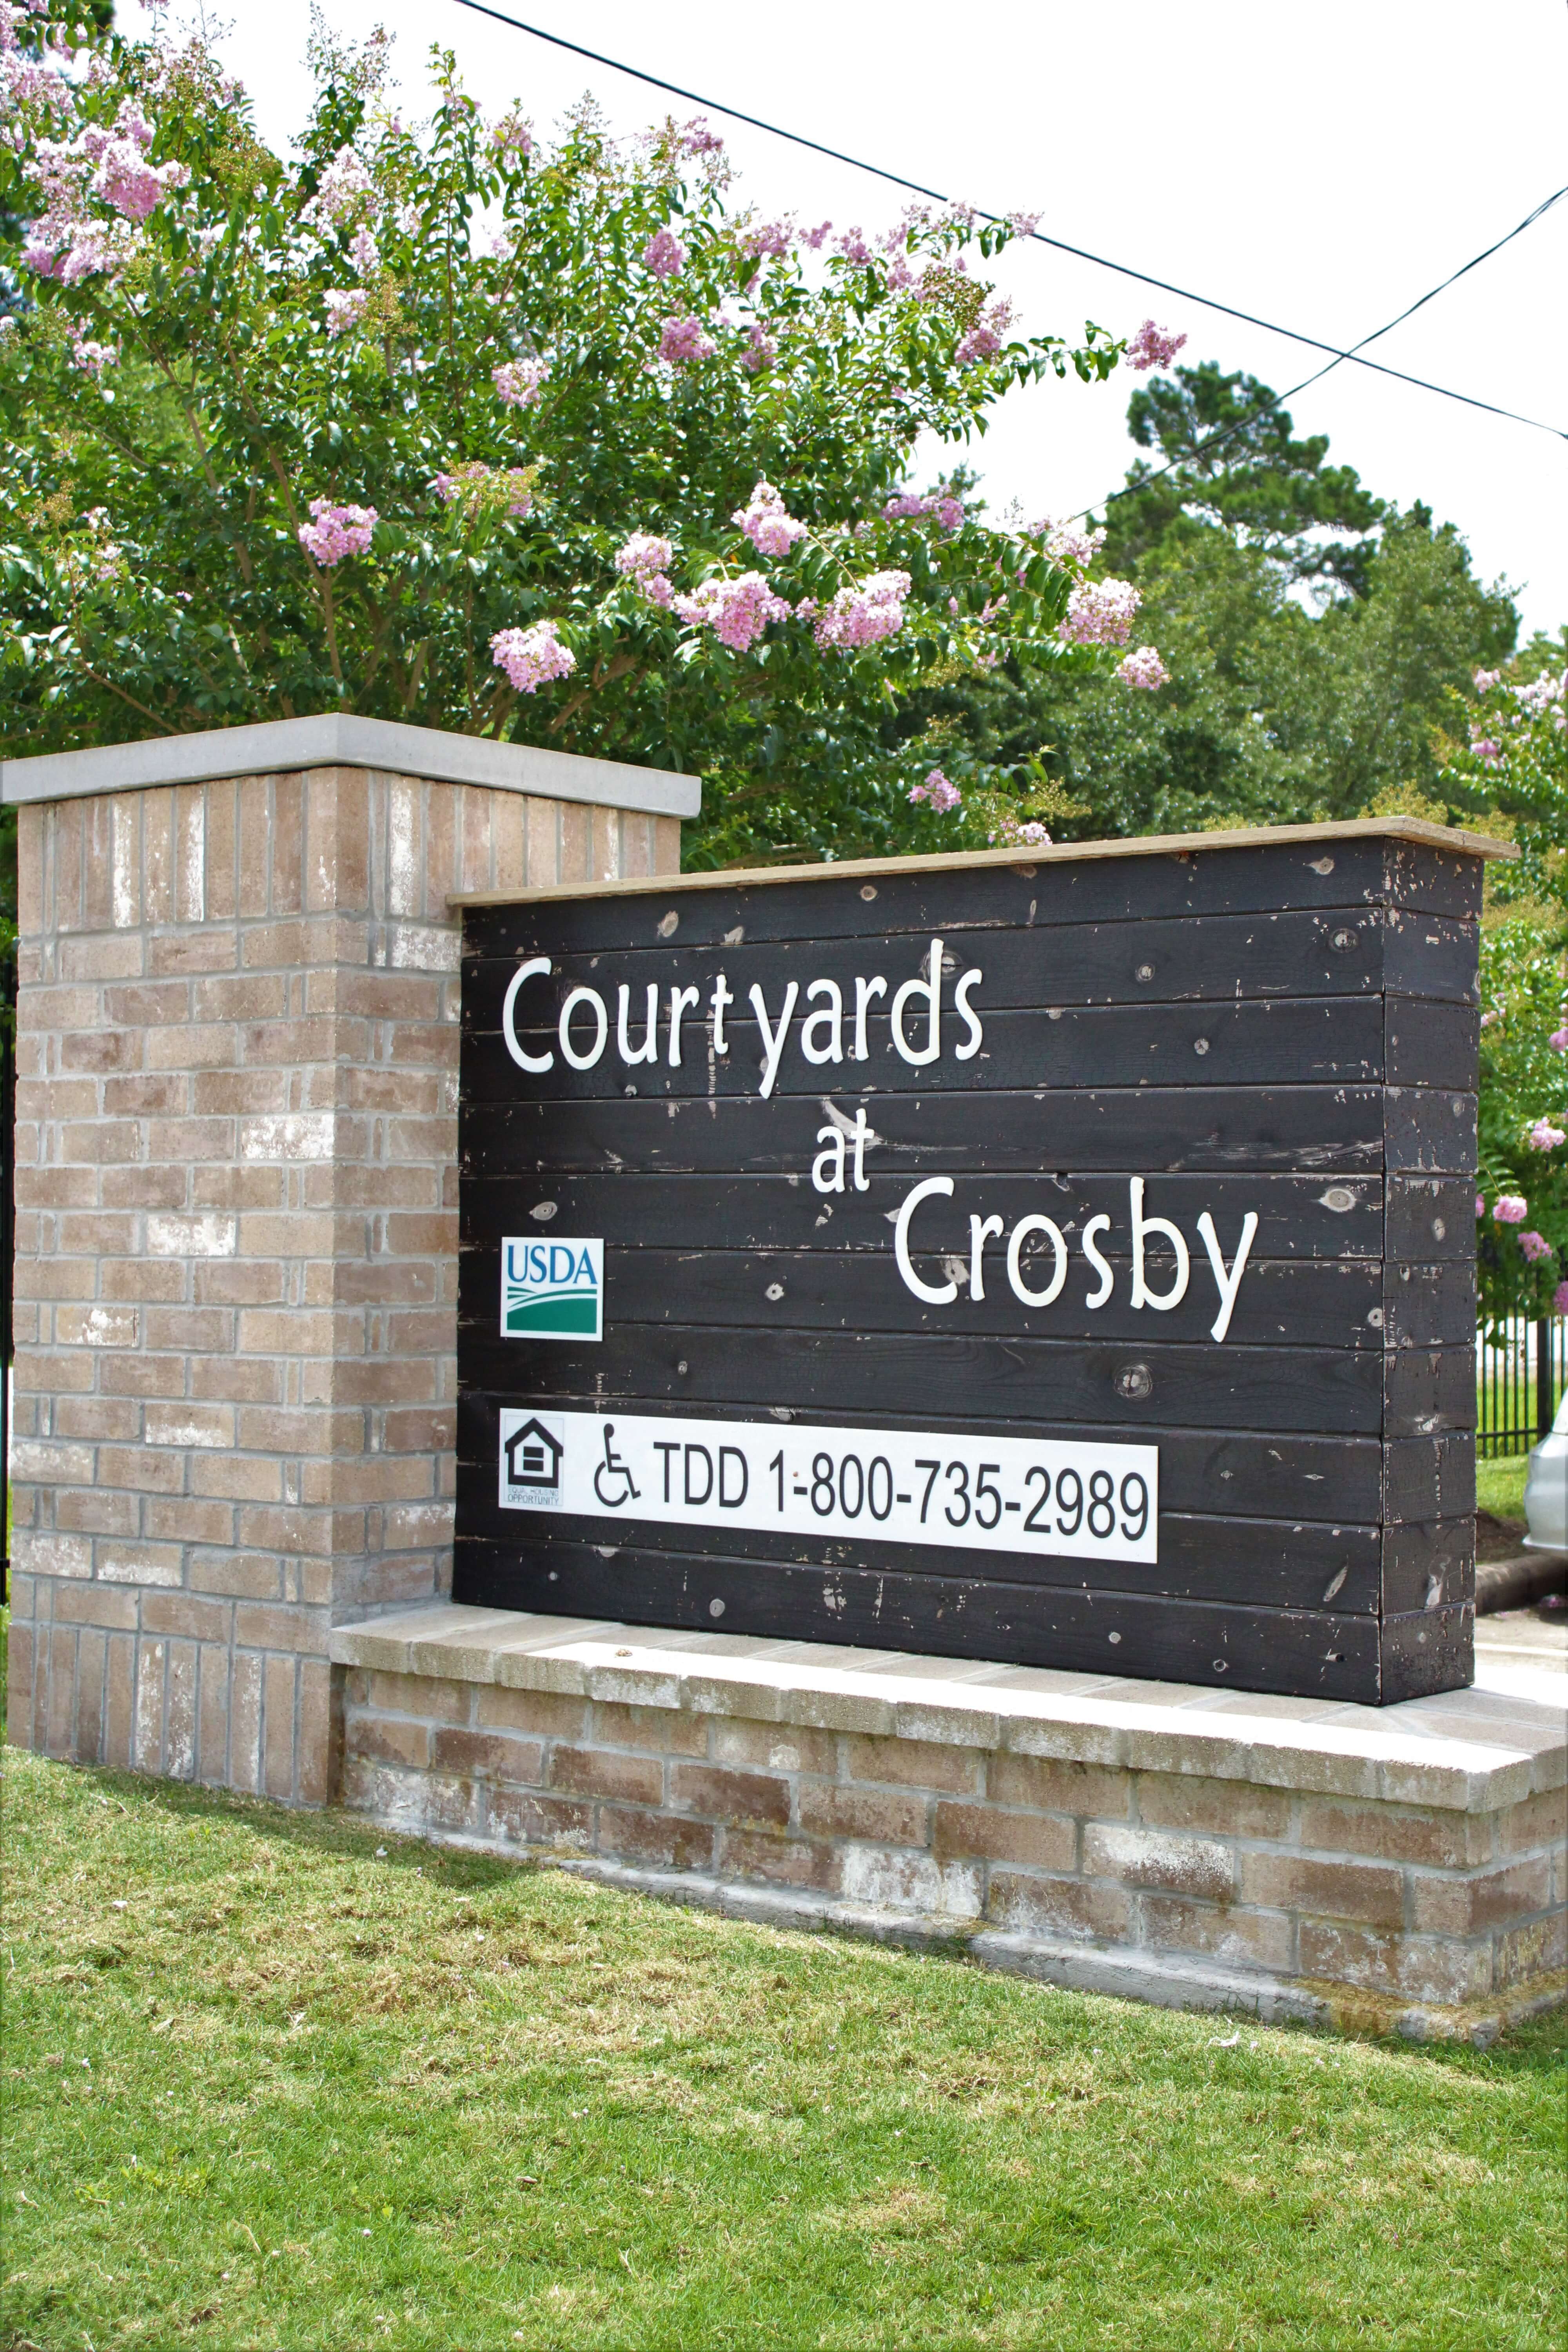 COURTYARDS AT CROSBY